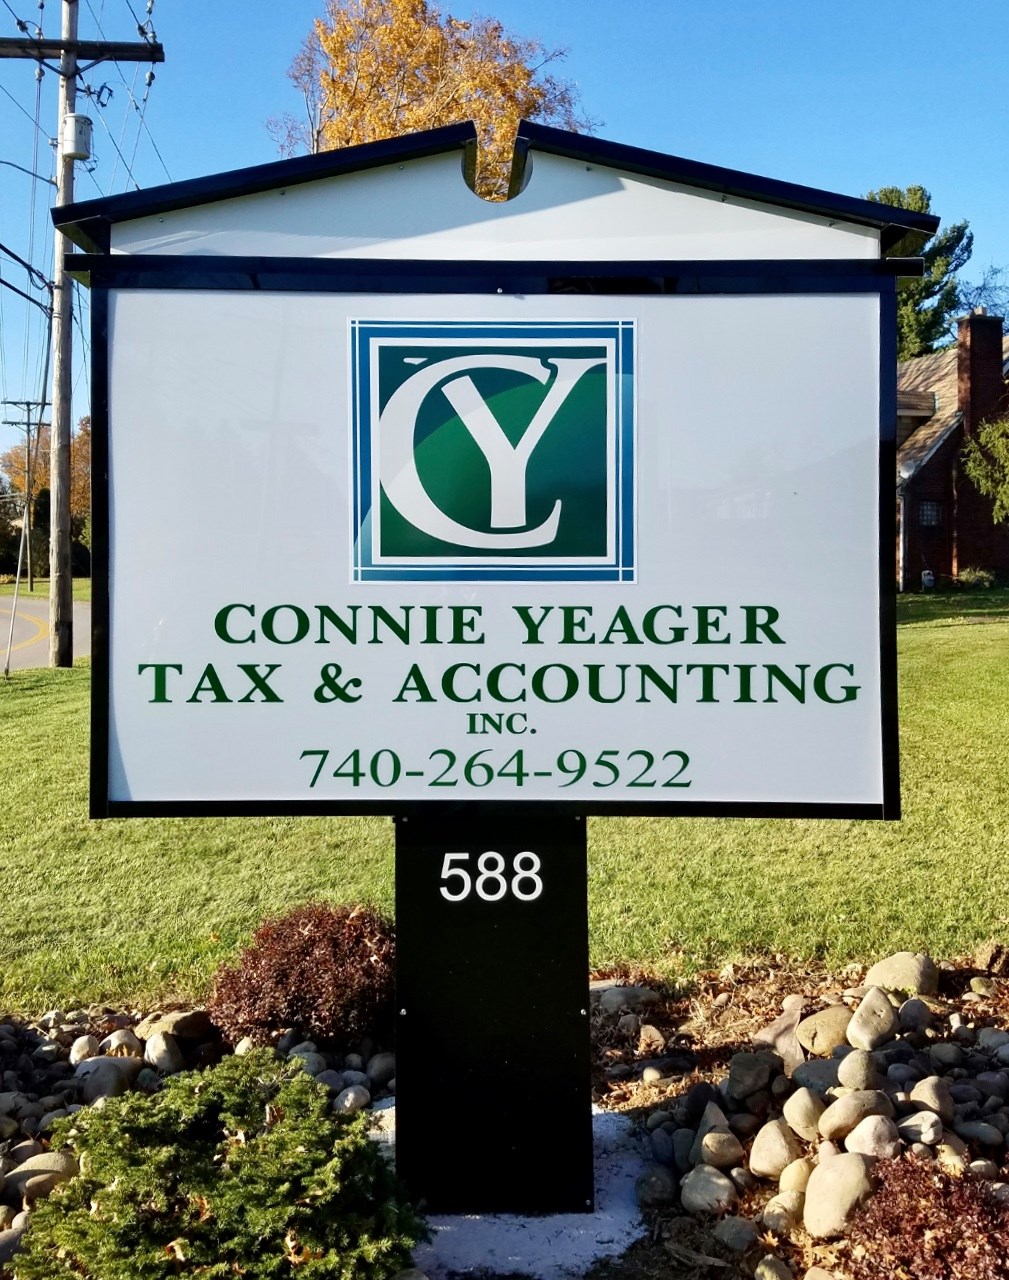 Connie Yeager Tax & Accounting, Inc.